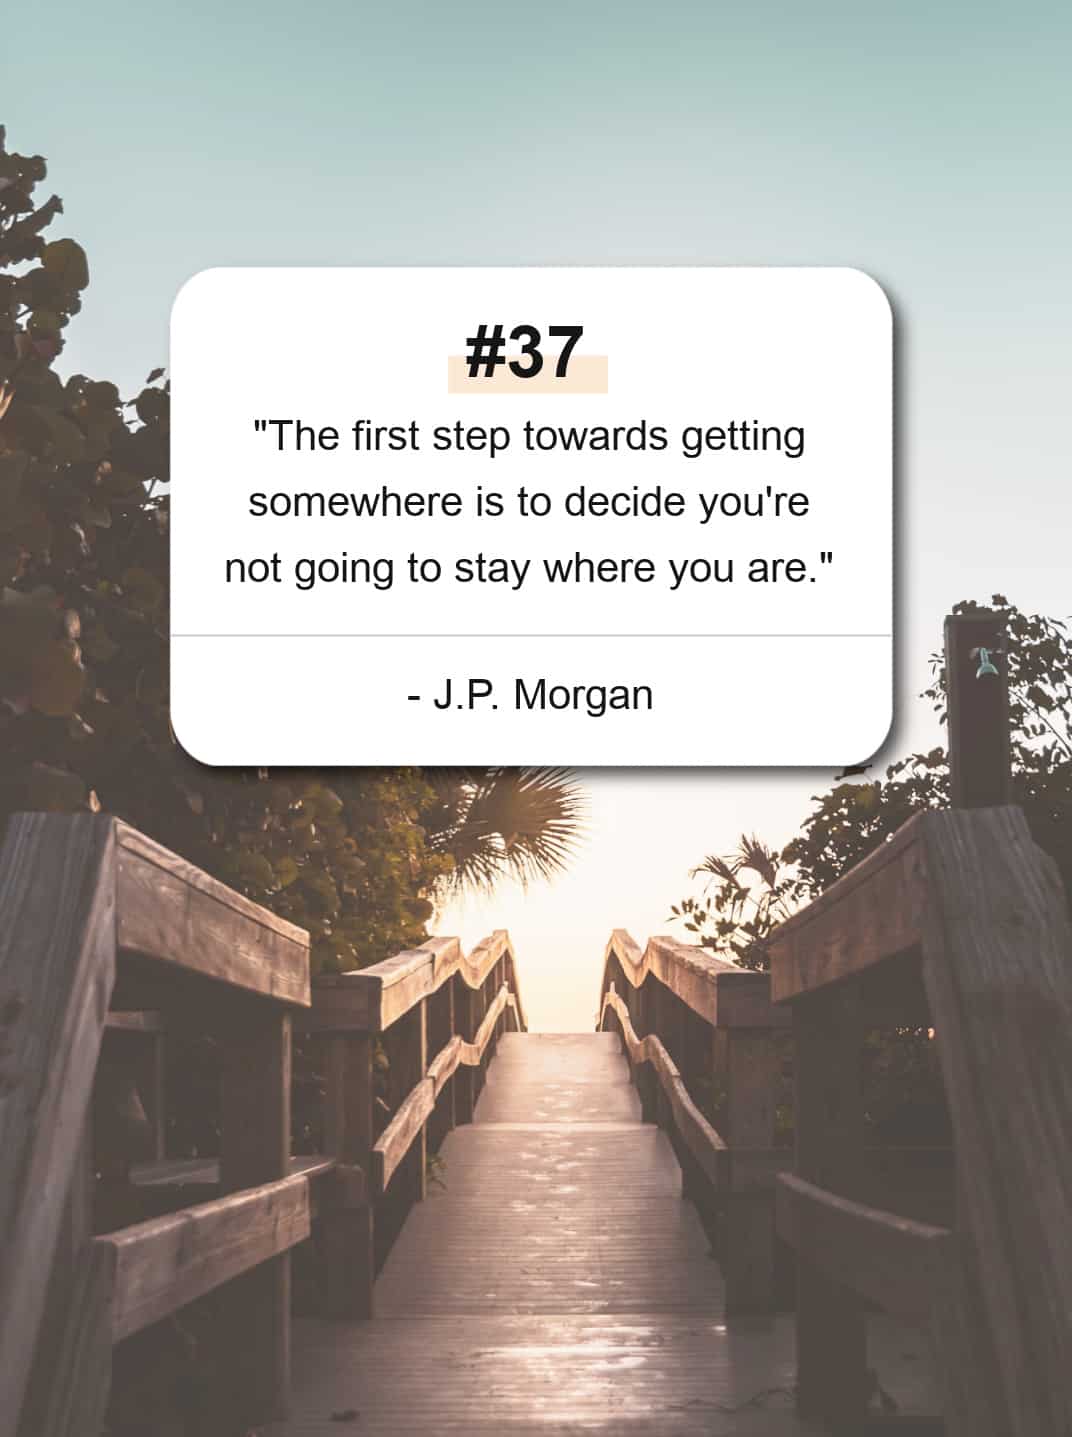 A end of year reflection quote from JP Morgan